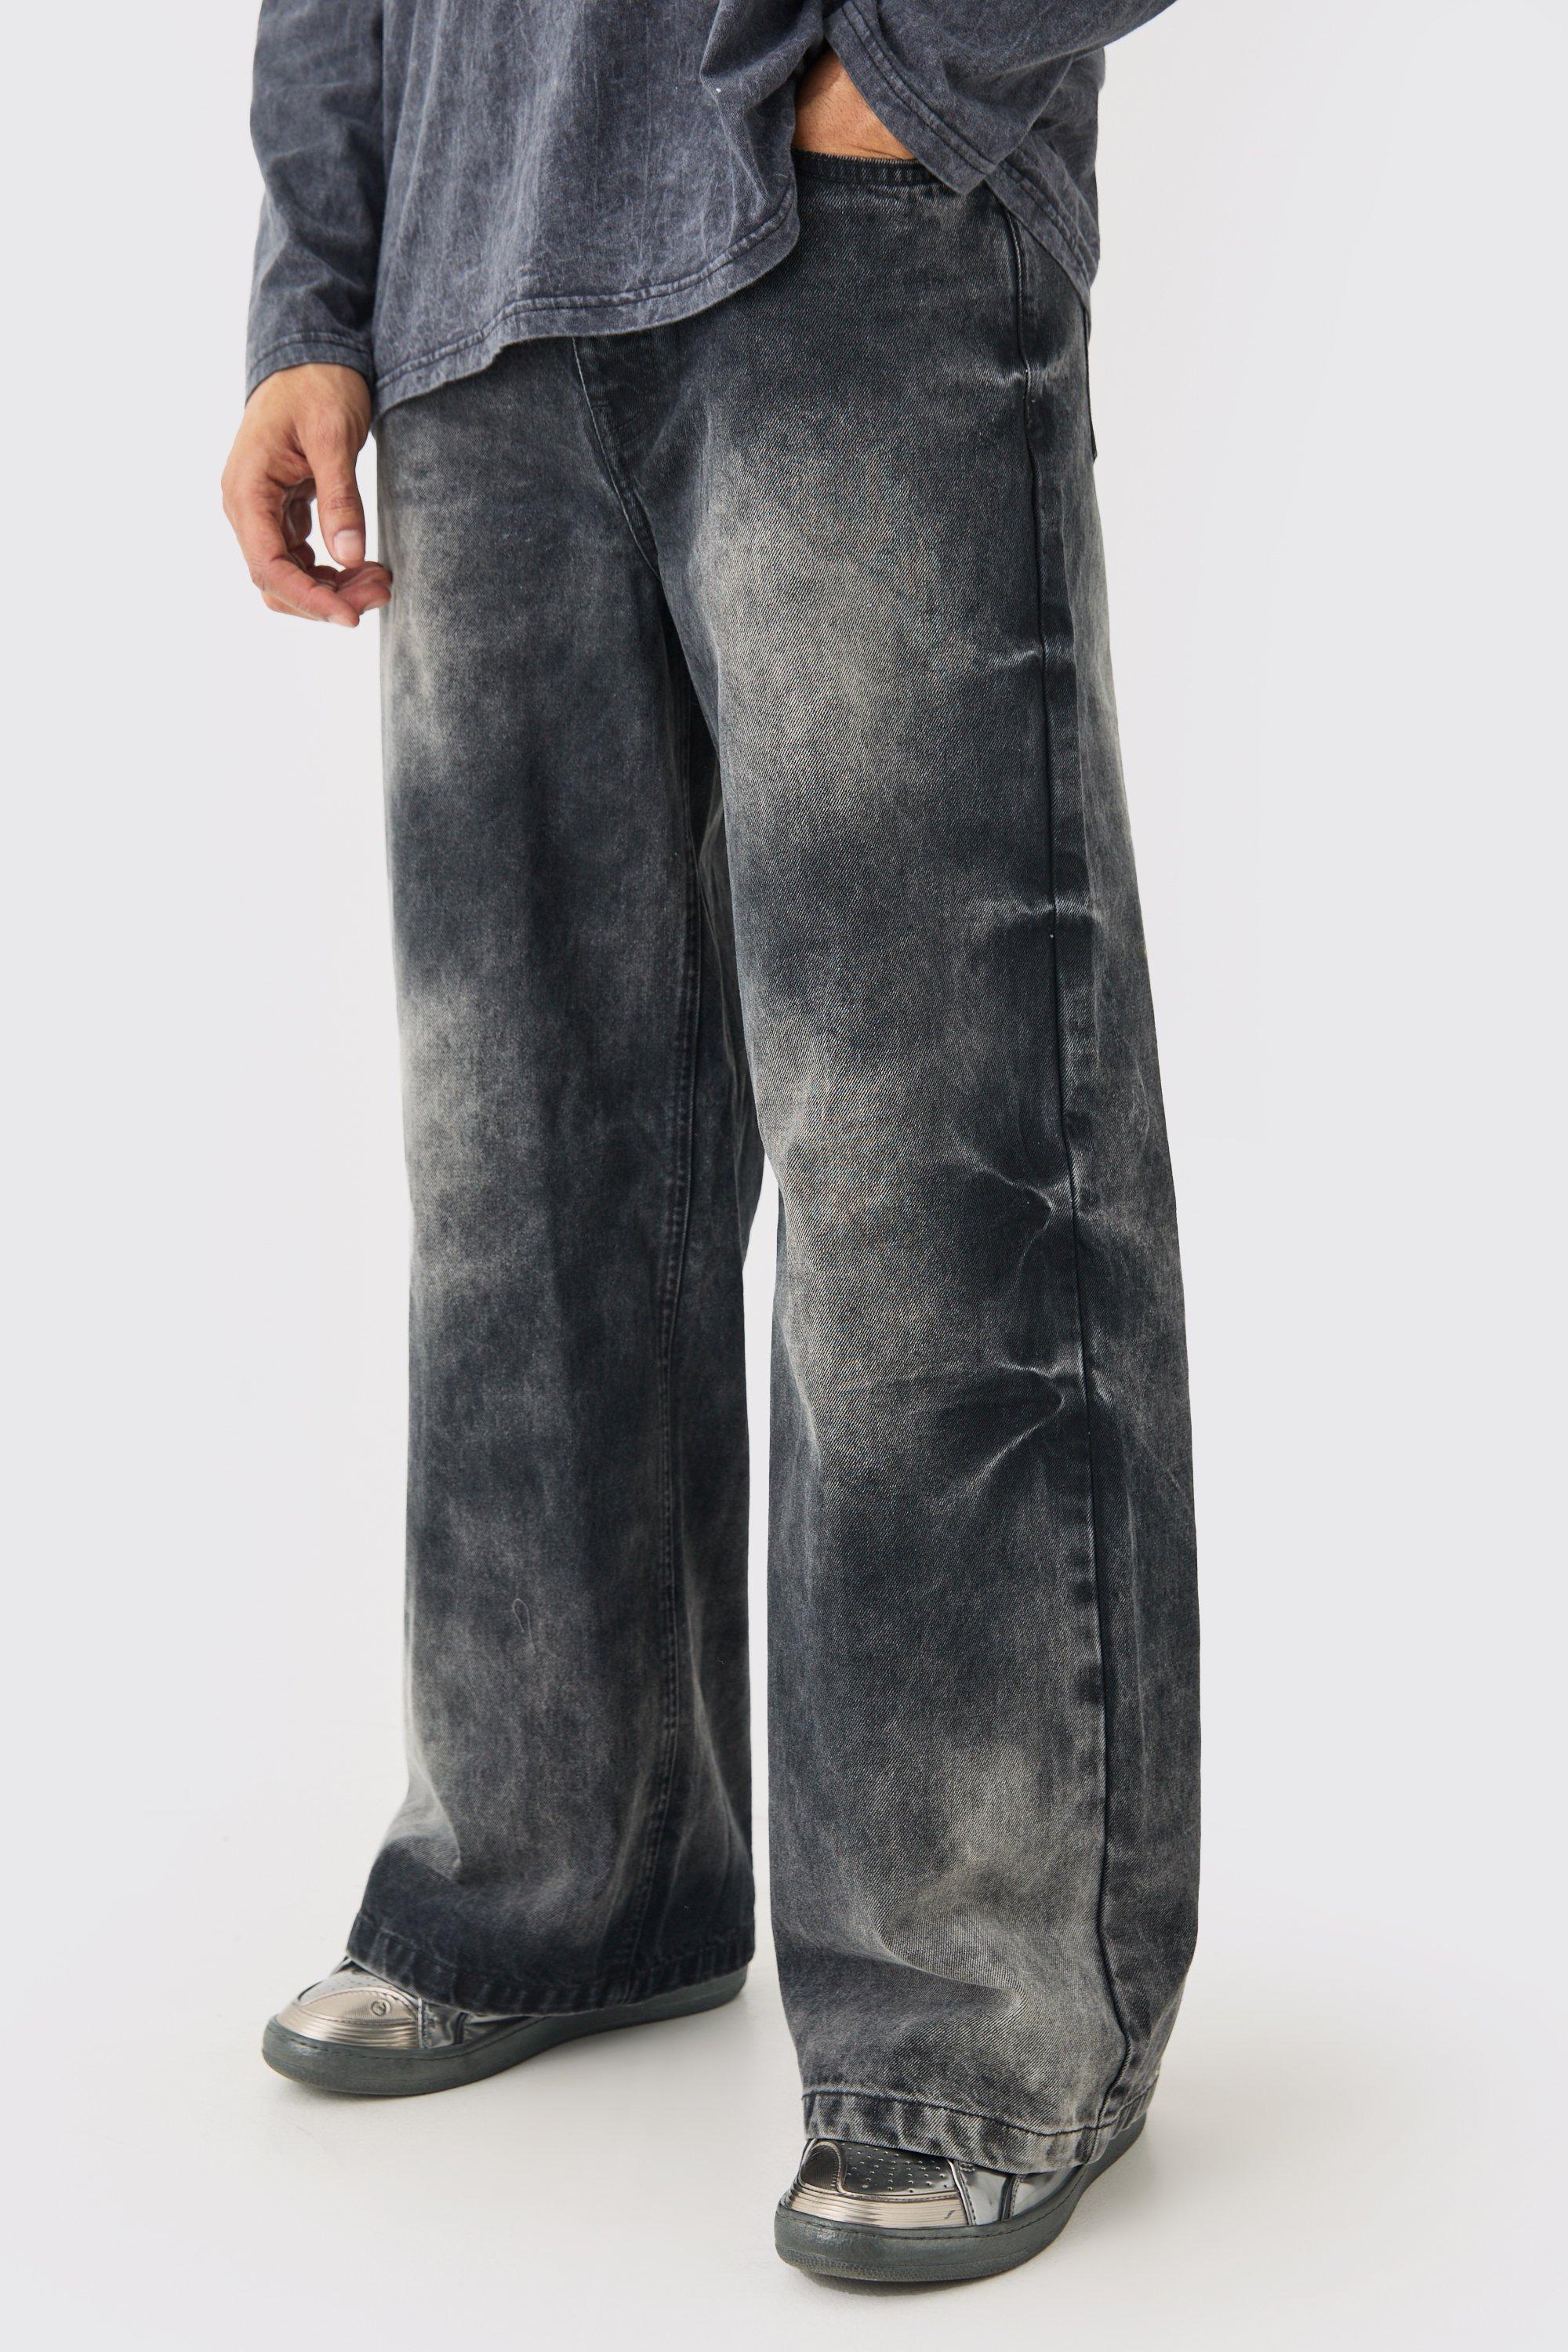 Image of Extreme Baggy Acid Wash Jeans In Washed Black, Nero